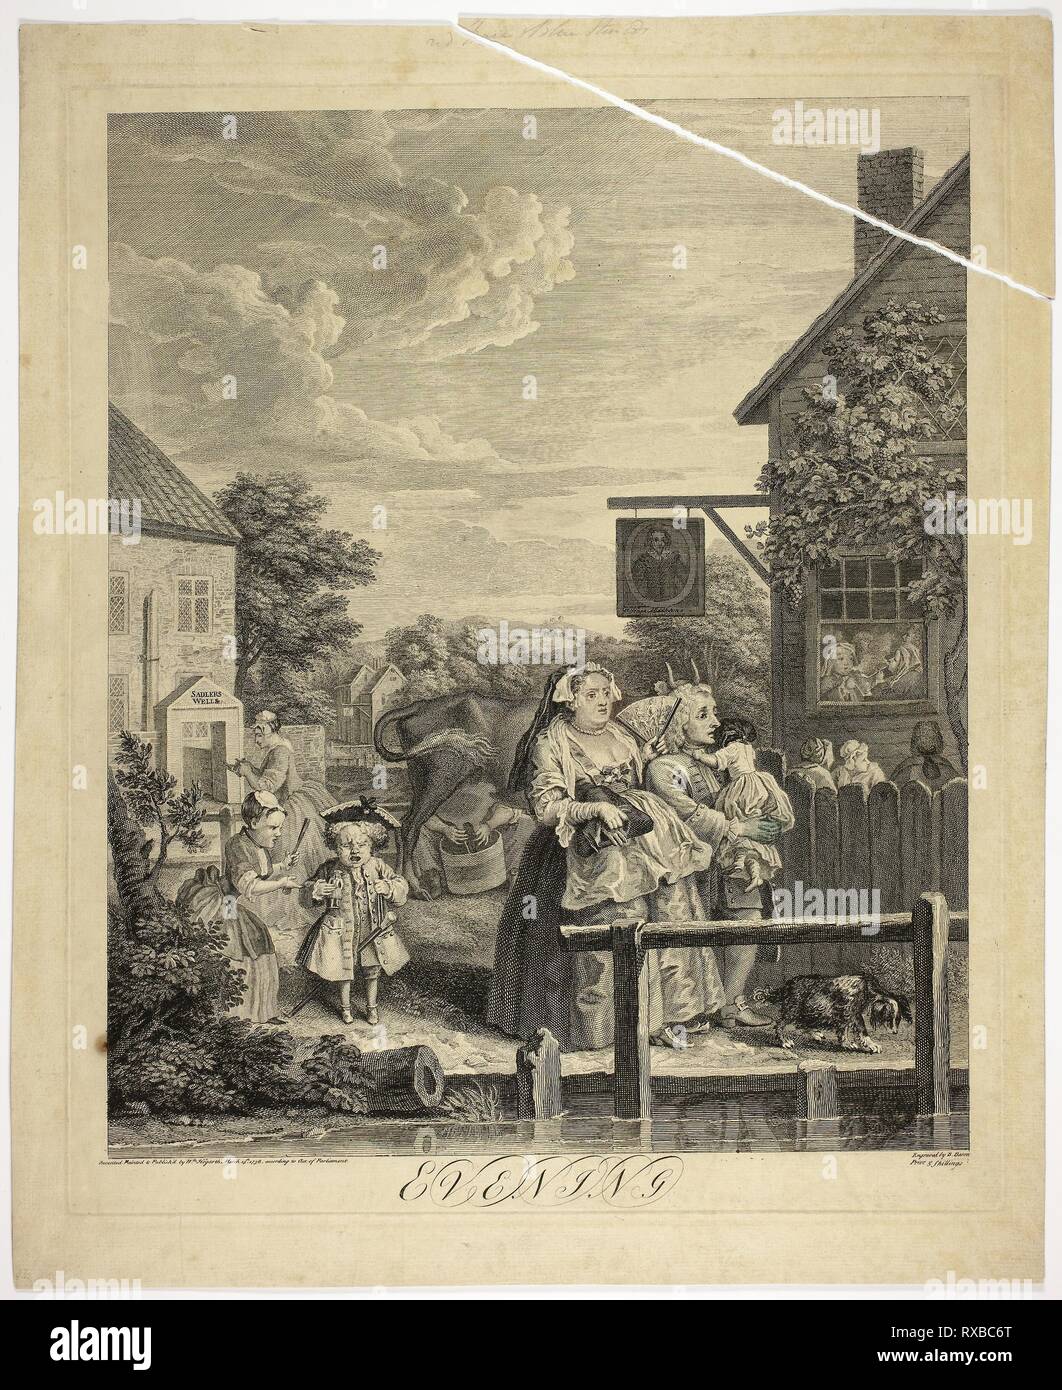 Evening, plate three from The Four Times of Day. Bernard Baron (French, 1696-1762); after William Hogarth (English, 1697-1764). Date: 1738. Dimensions: 450 × 372 mm (image); 483 × 402 mm (plate); 545 × 443 mm (sheet). Etching and engraving in black on cream laid paper. Origin: France. Museum: The Chicago Art Institute. Stock Photo